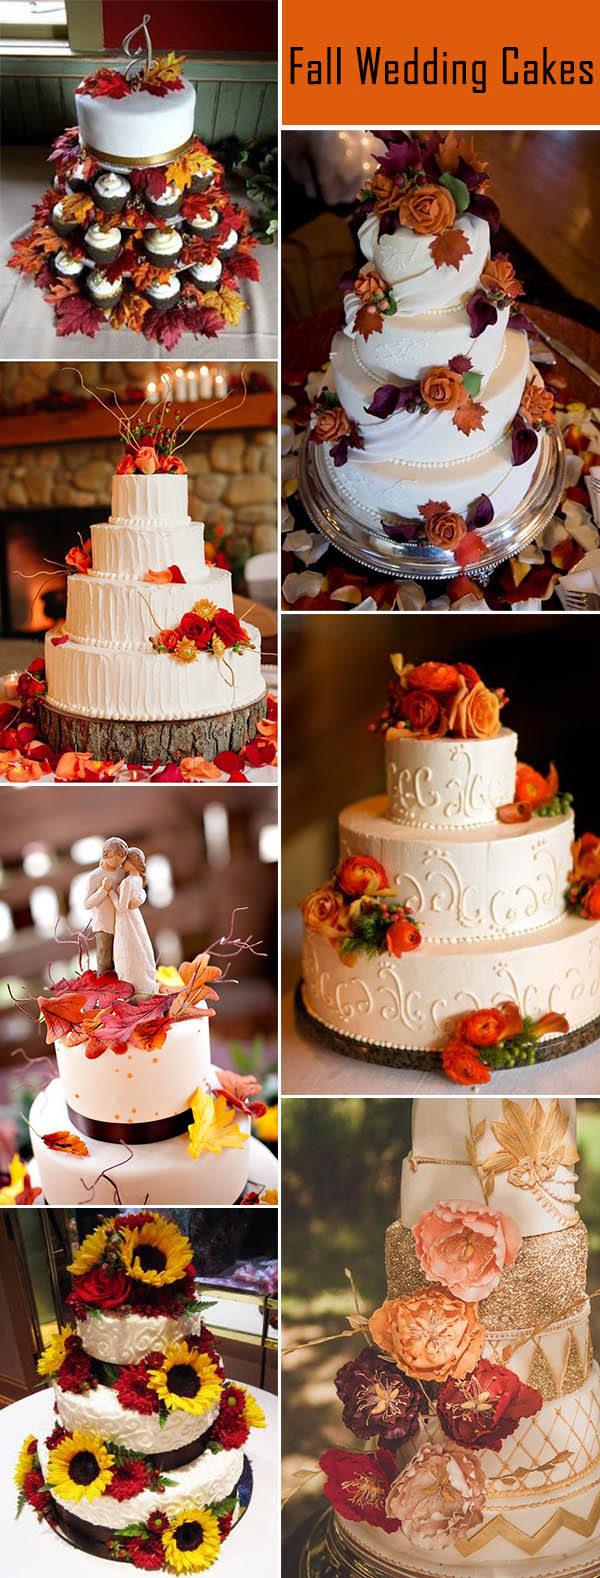 Fall Wedding Cakes Ideas
 Fall In Love With These 50 Great Fall Wedding Ideas